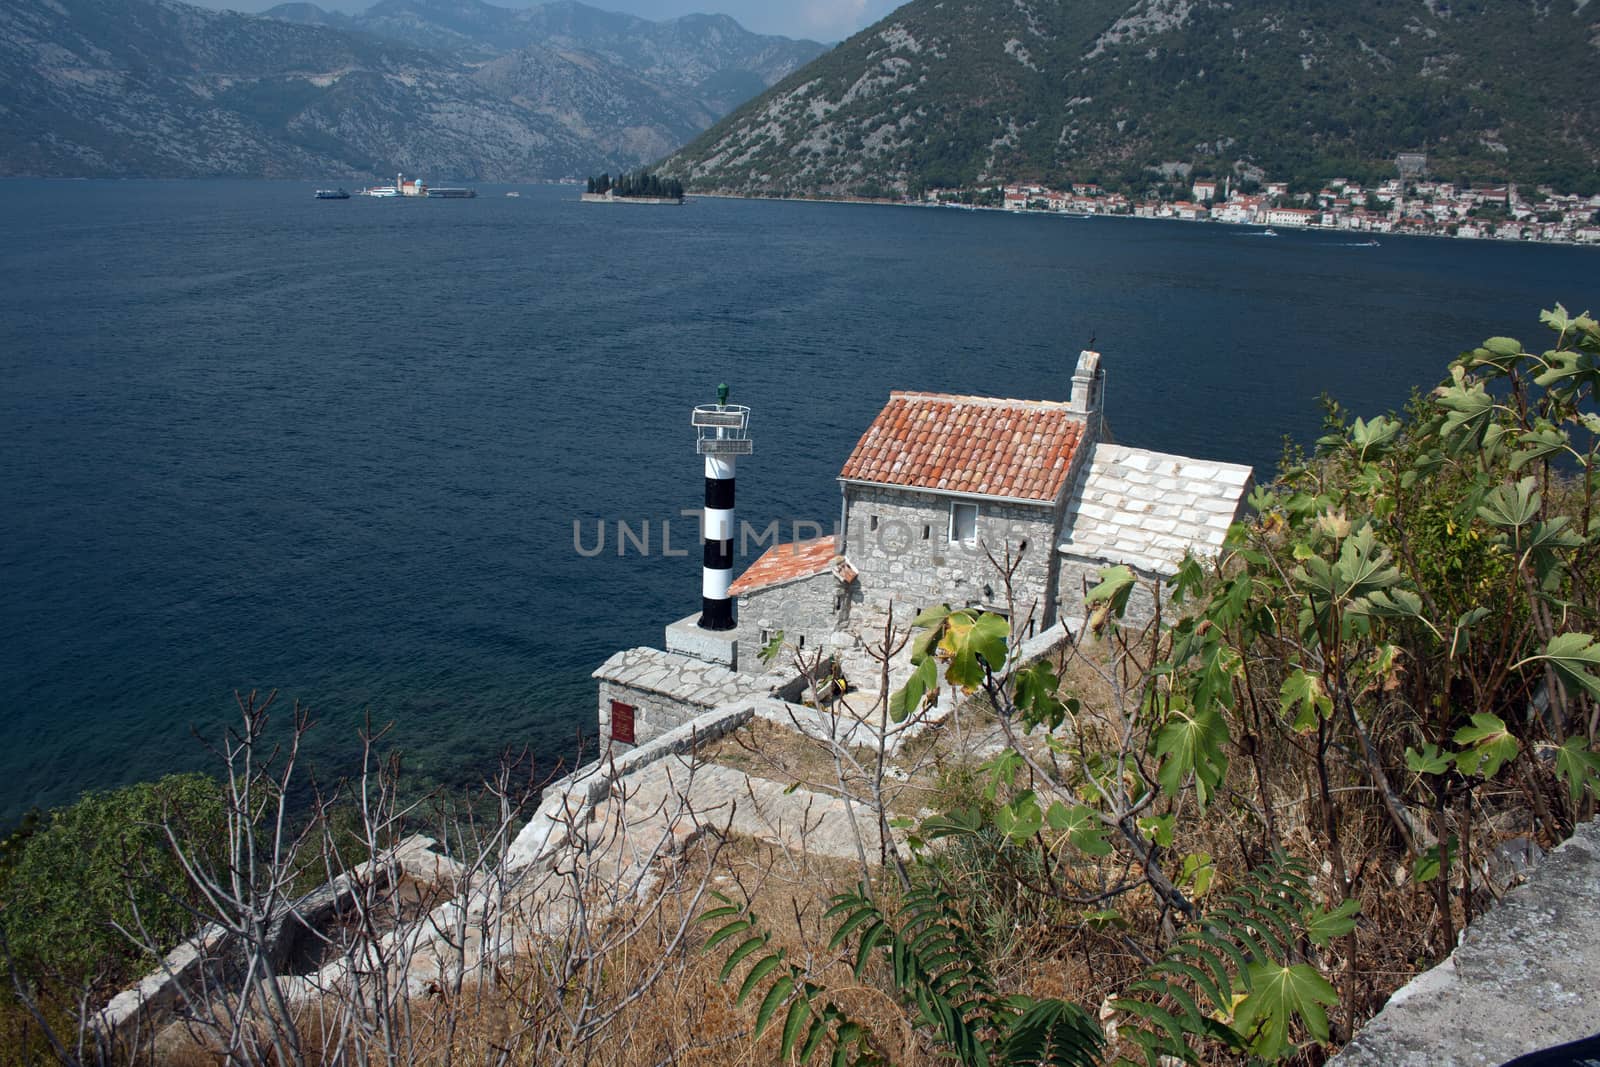 Bay of Kotor, Montenegro - Lighthouse and medieval church Our Lady of The Angel Gospa od Andjela 